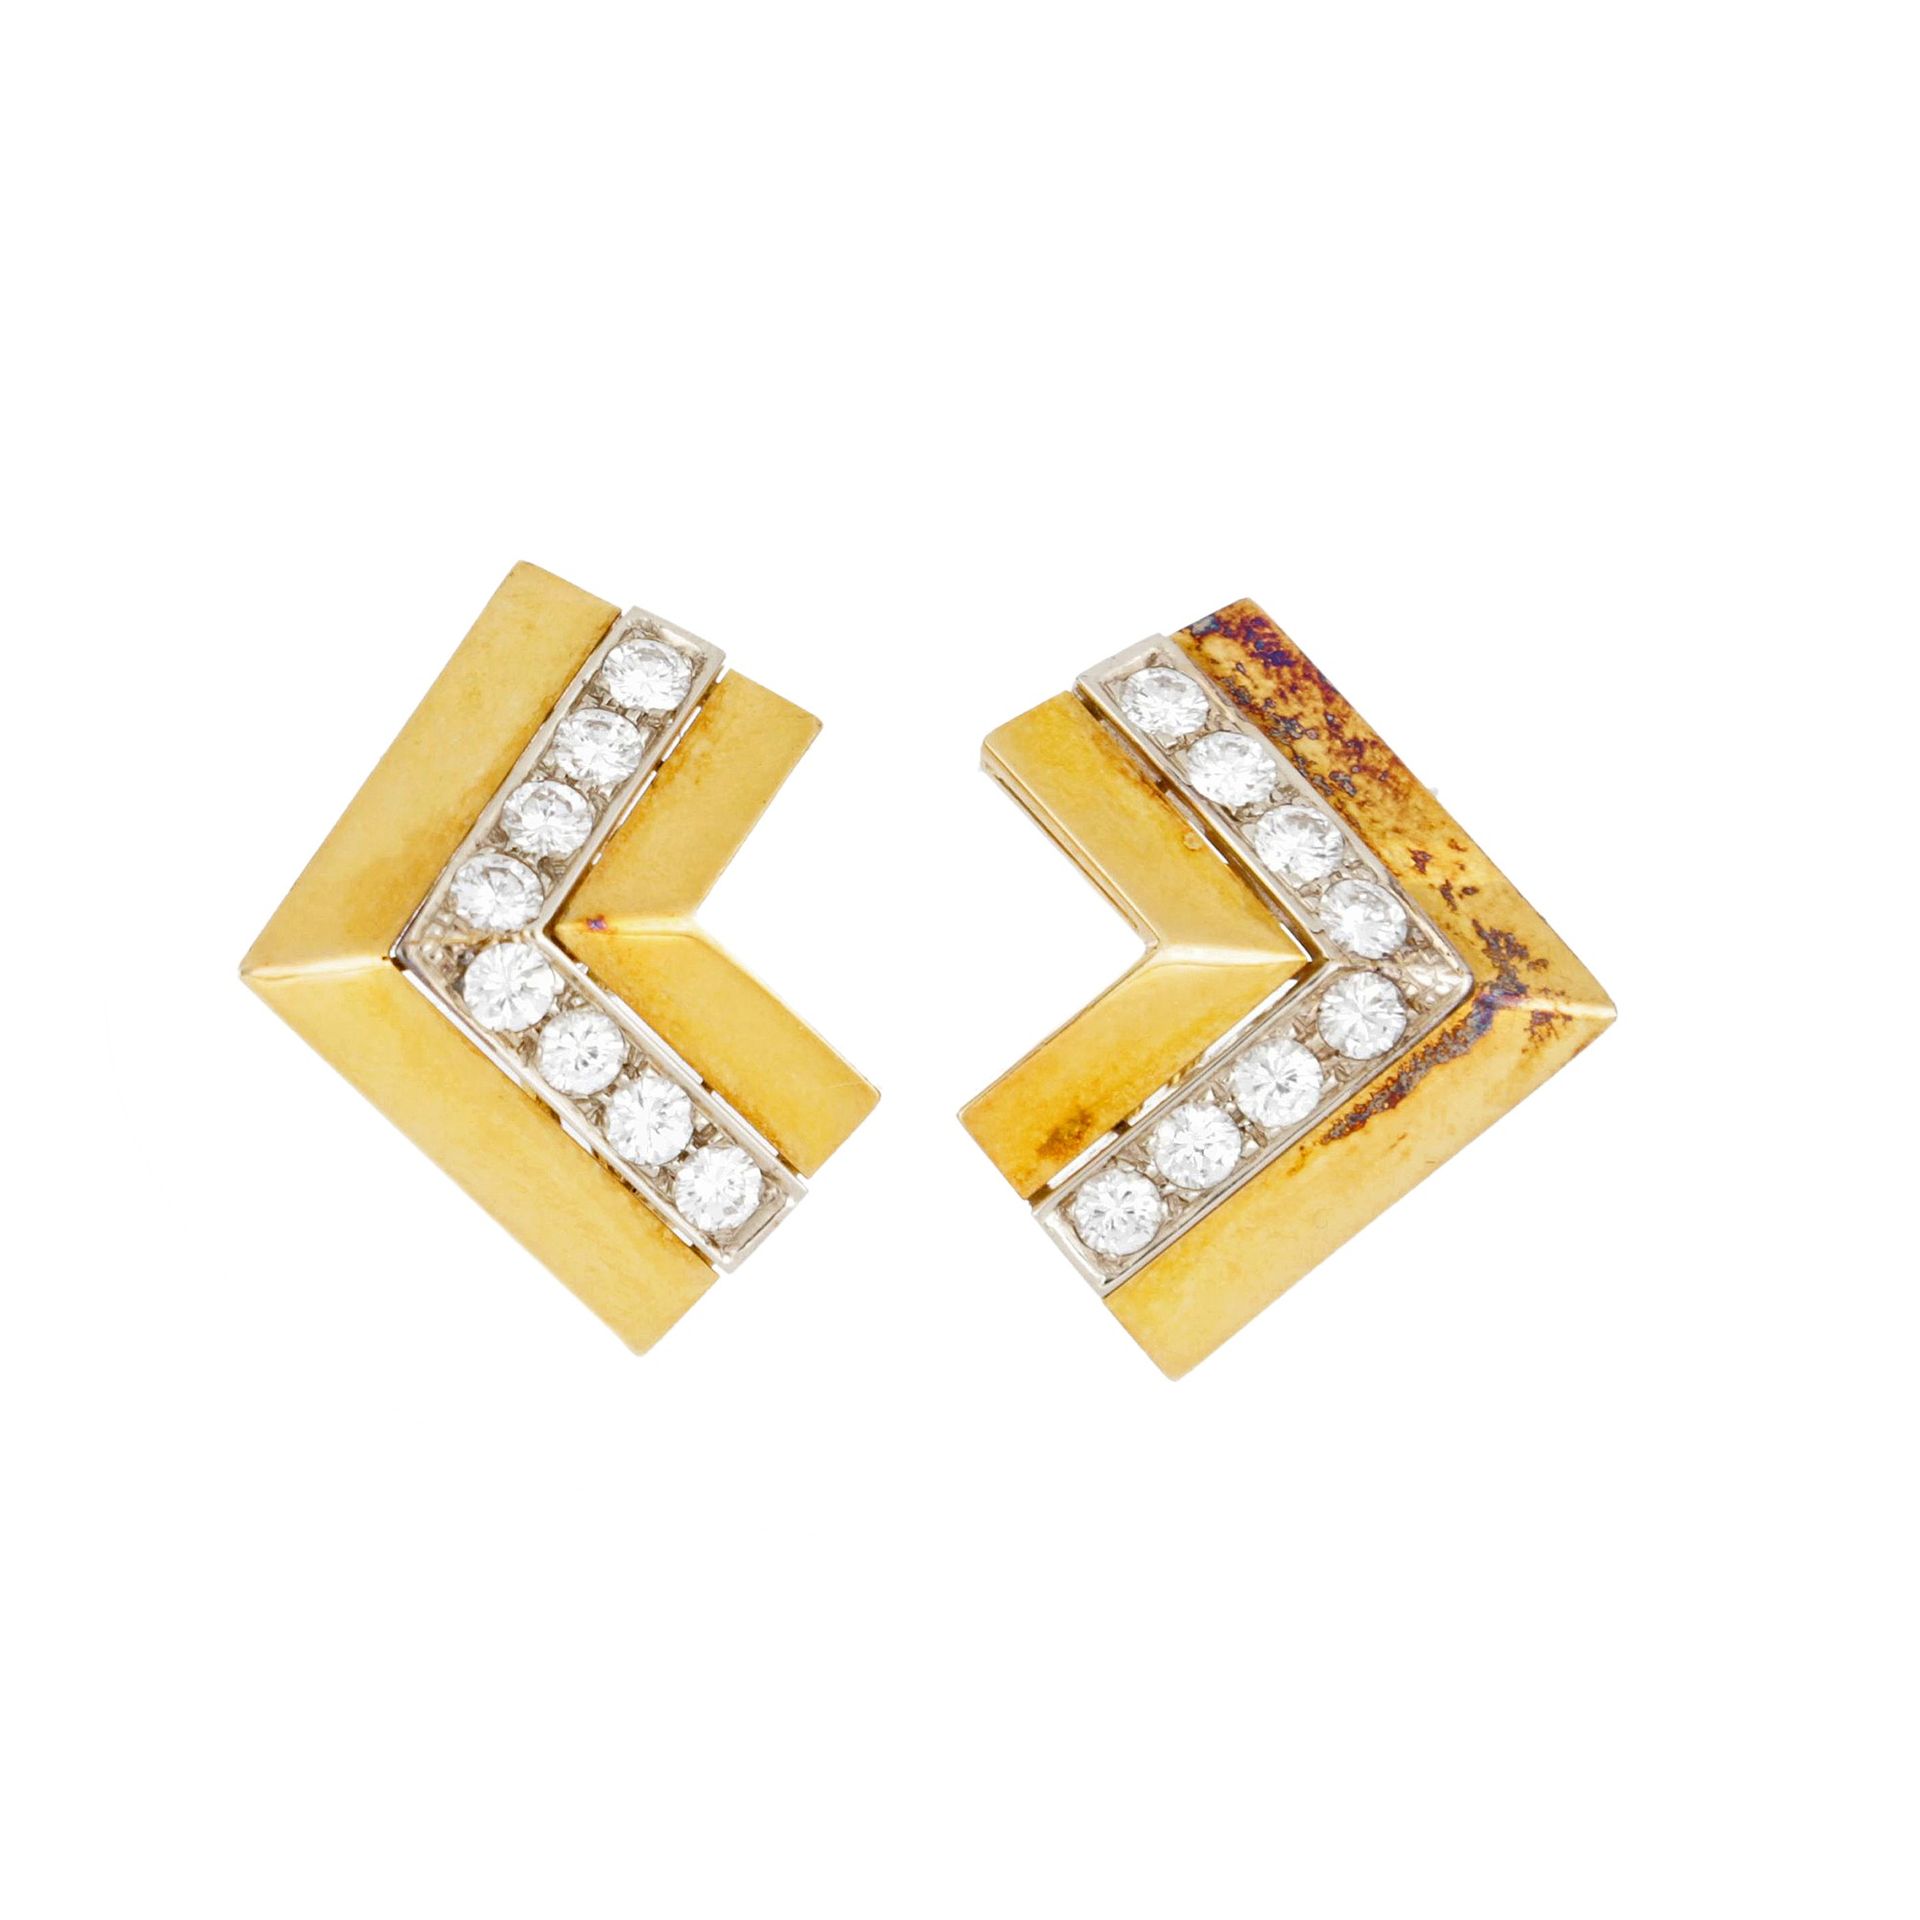 Null Earrings in 18K yellow gold with brilliant-cut diamonds weighing approximat&hellip;